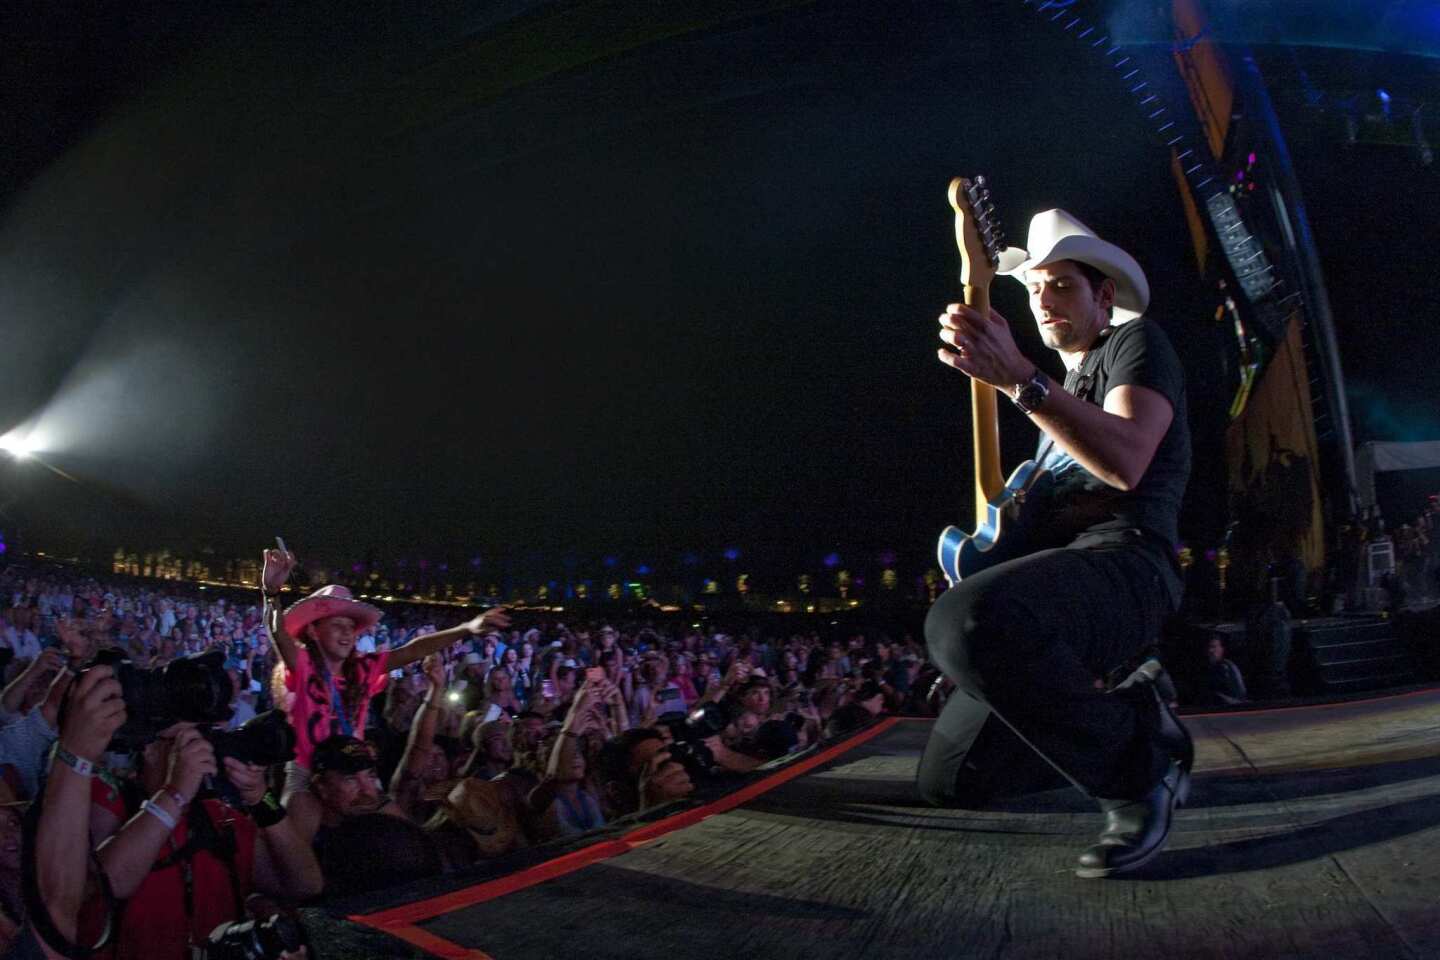 Brad Paisley performs during the Stagecoach country music festival in April at the Empire Polo Fields in Indio.